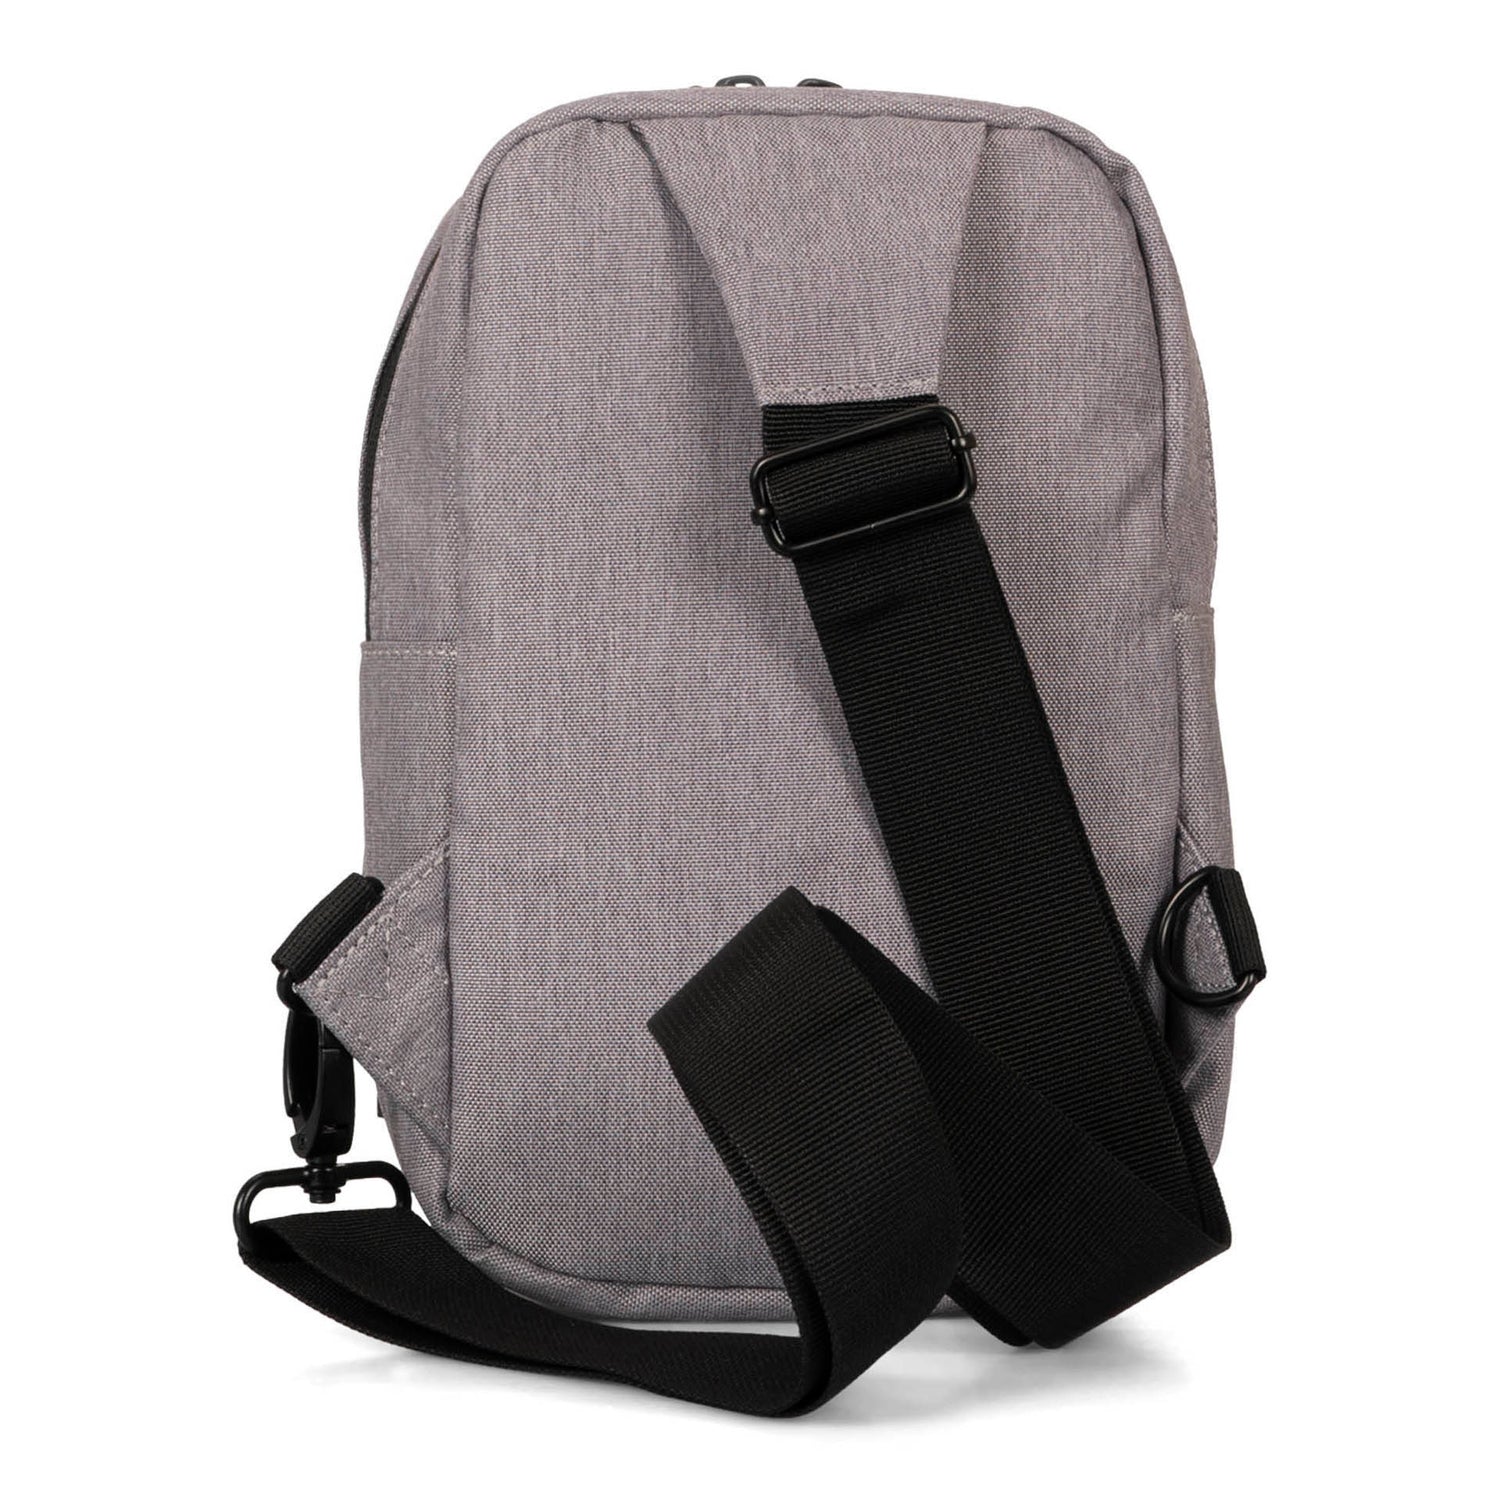 Back side of a grey sling bag called Nelson designed by Tracker showing its textured polyester and sling strap.